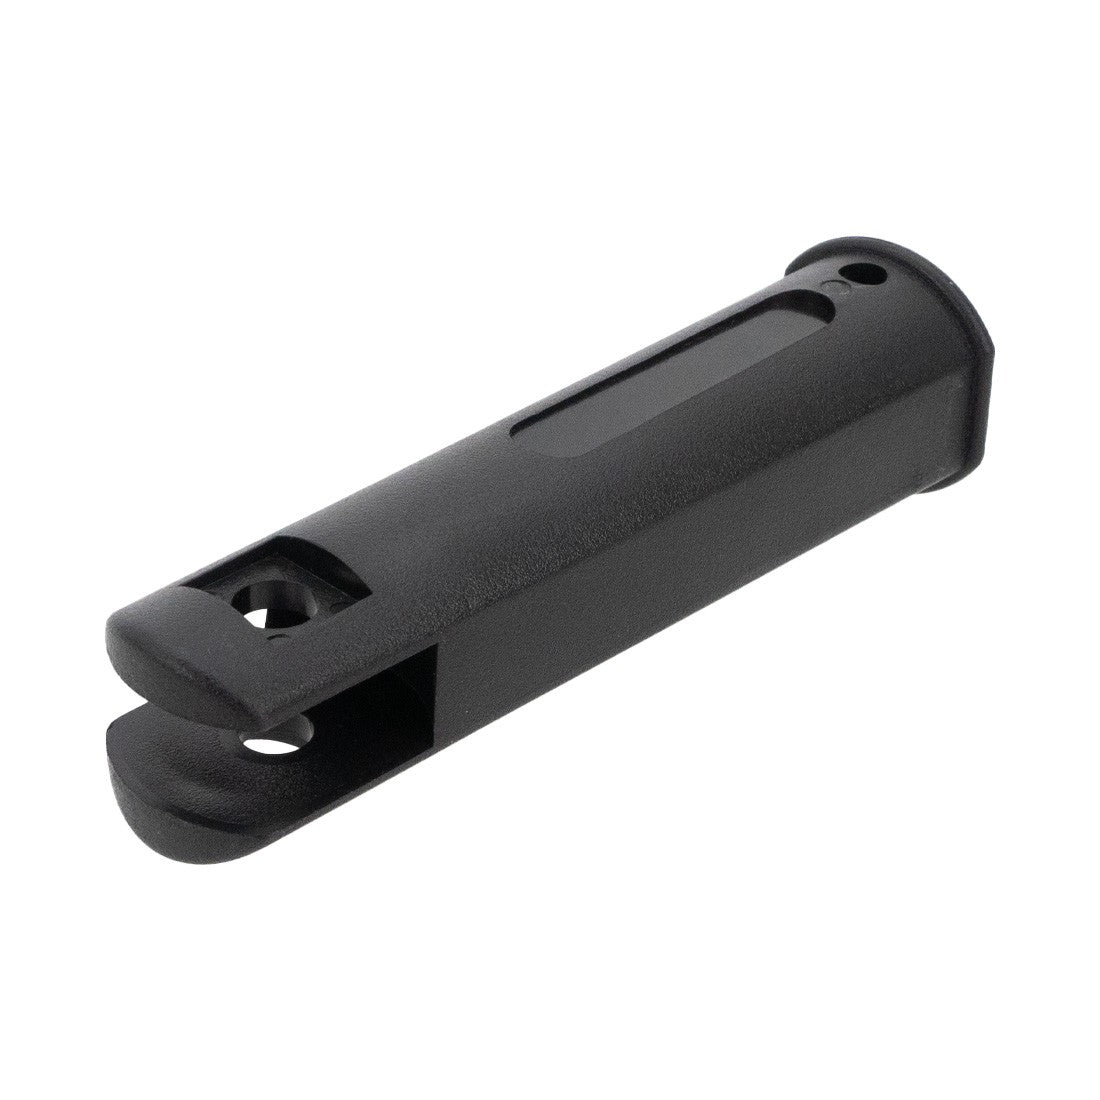 Companion Tools Replacement Handle Grip Top View